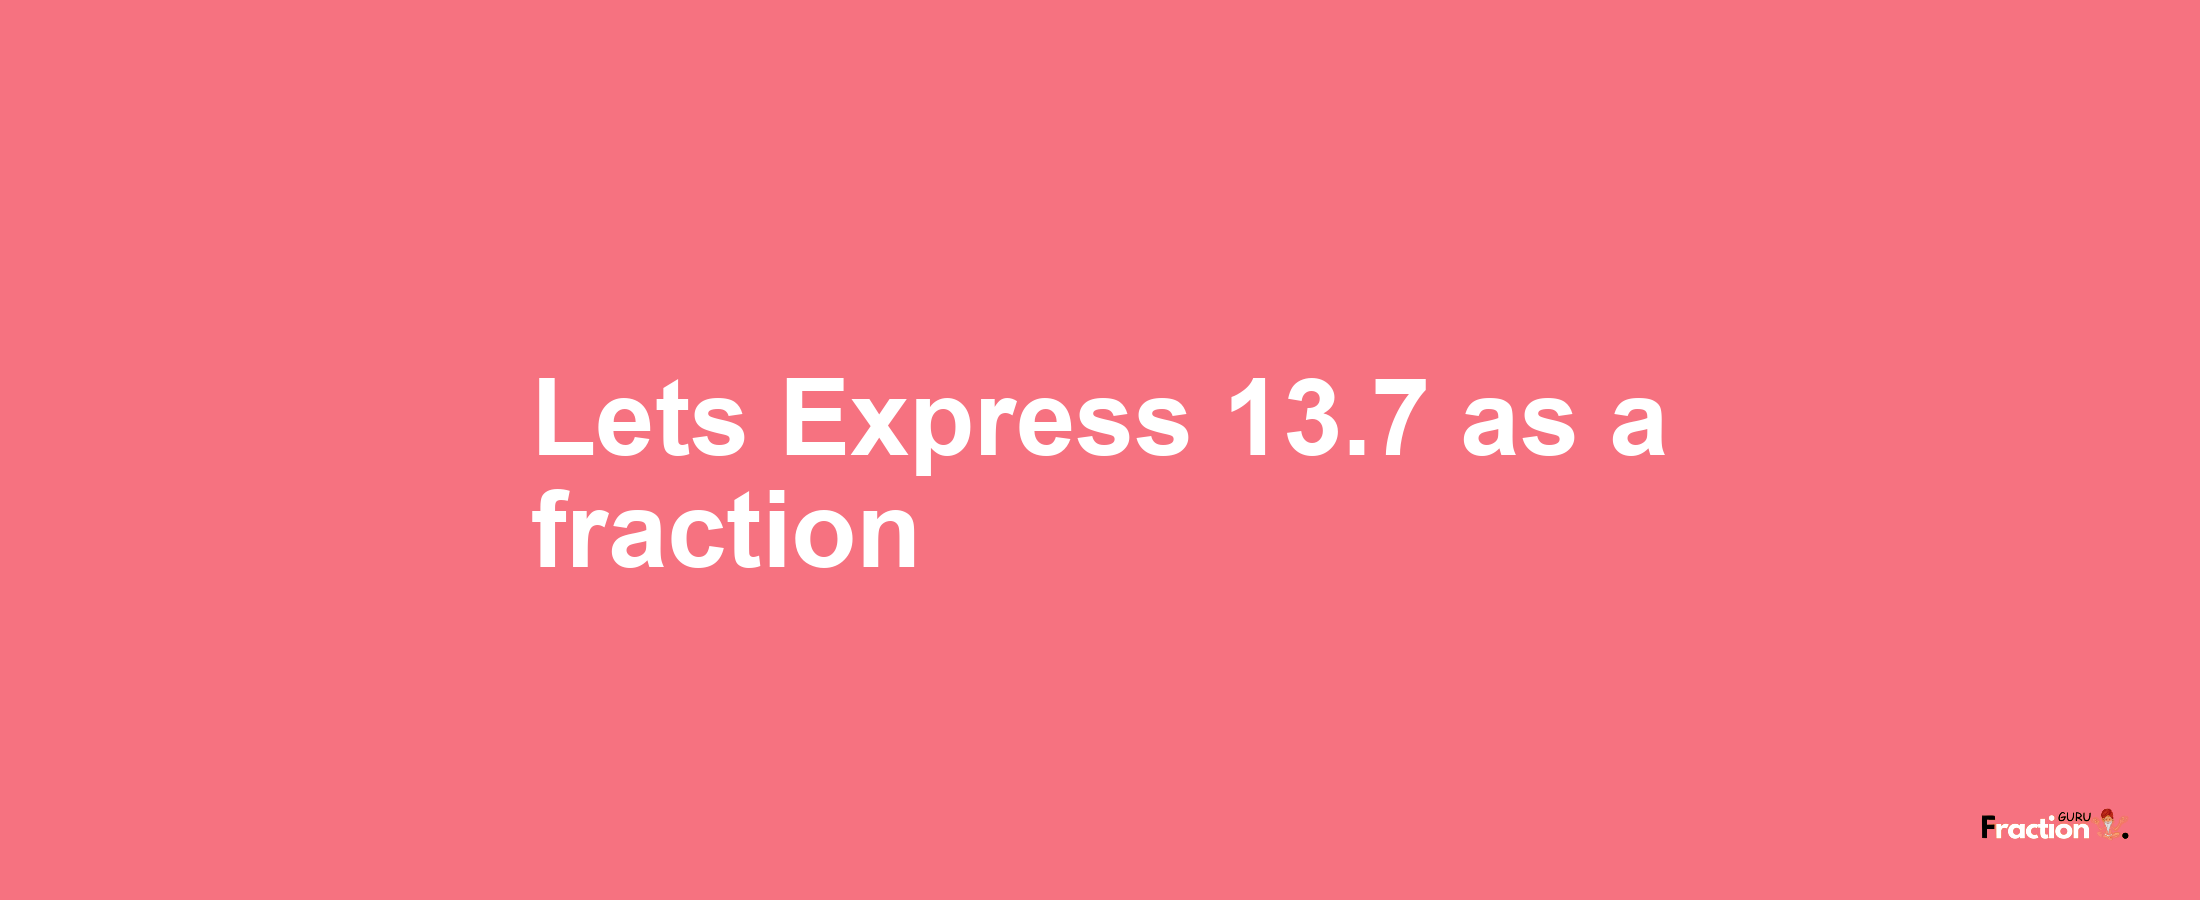 Lets Express 13.7 as afraction